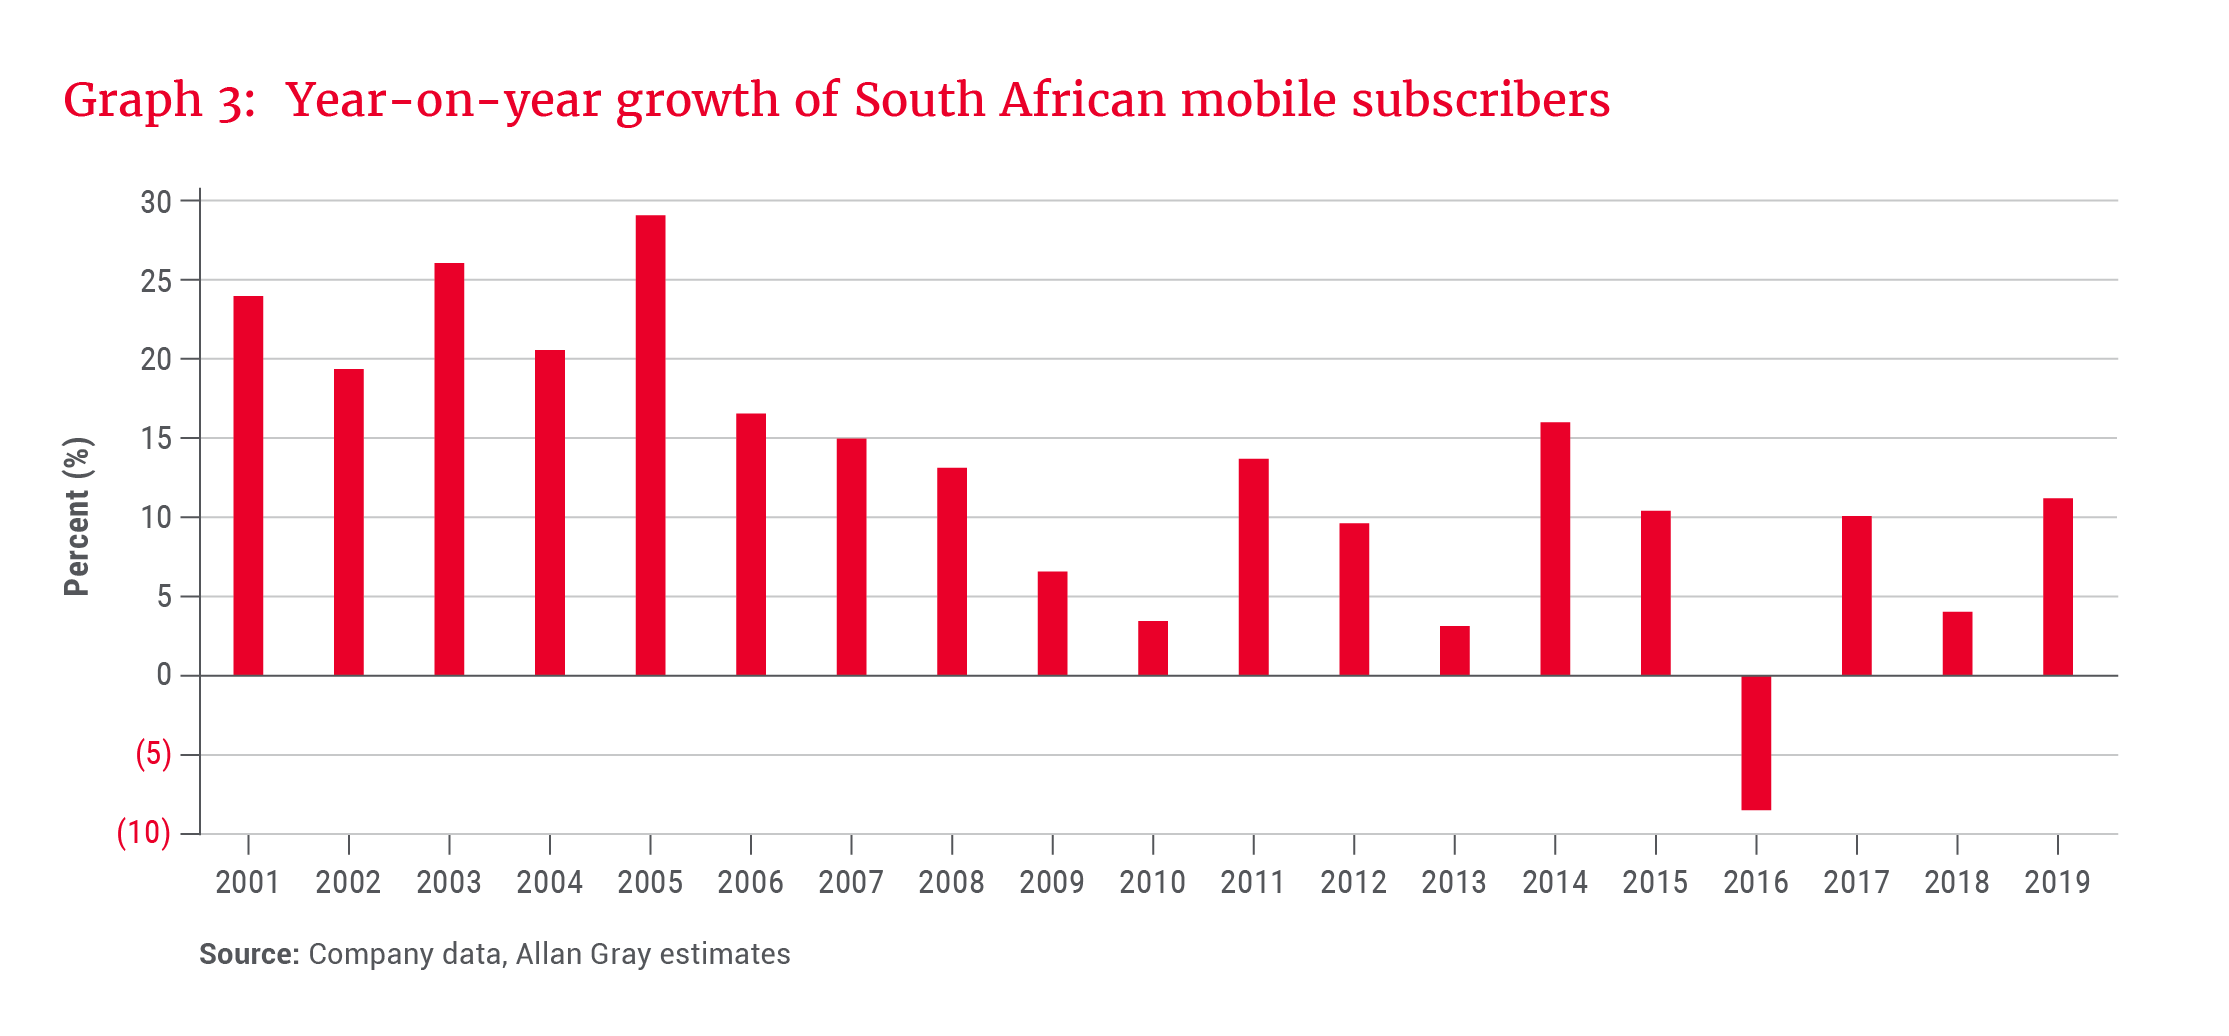 Year-on-year growth of South African mobile subscribers - Allan Gray